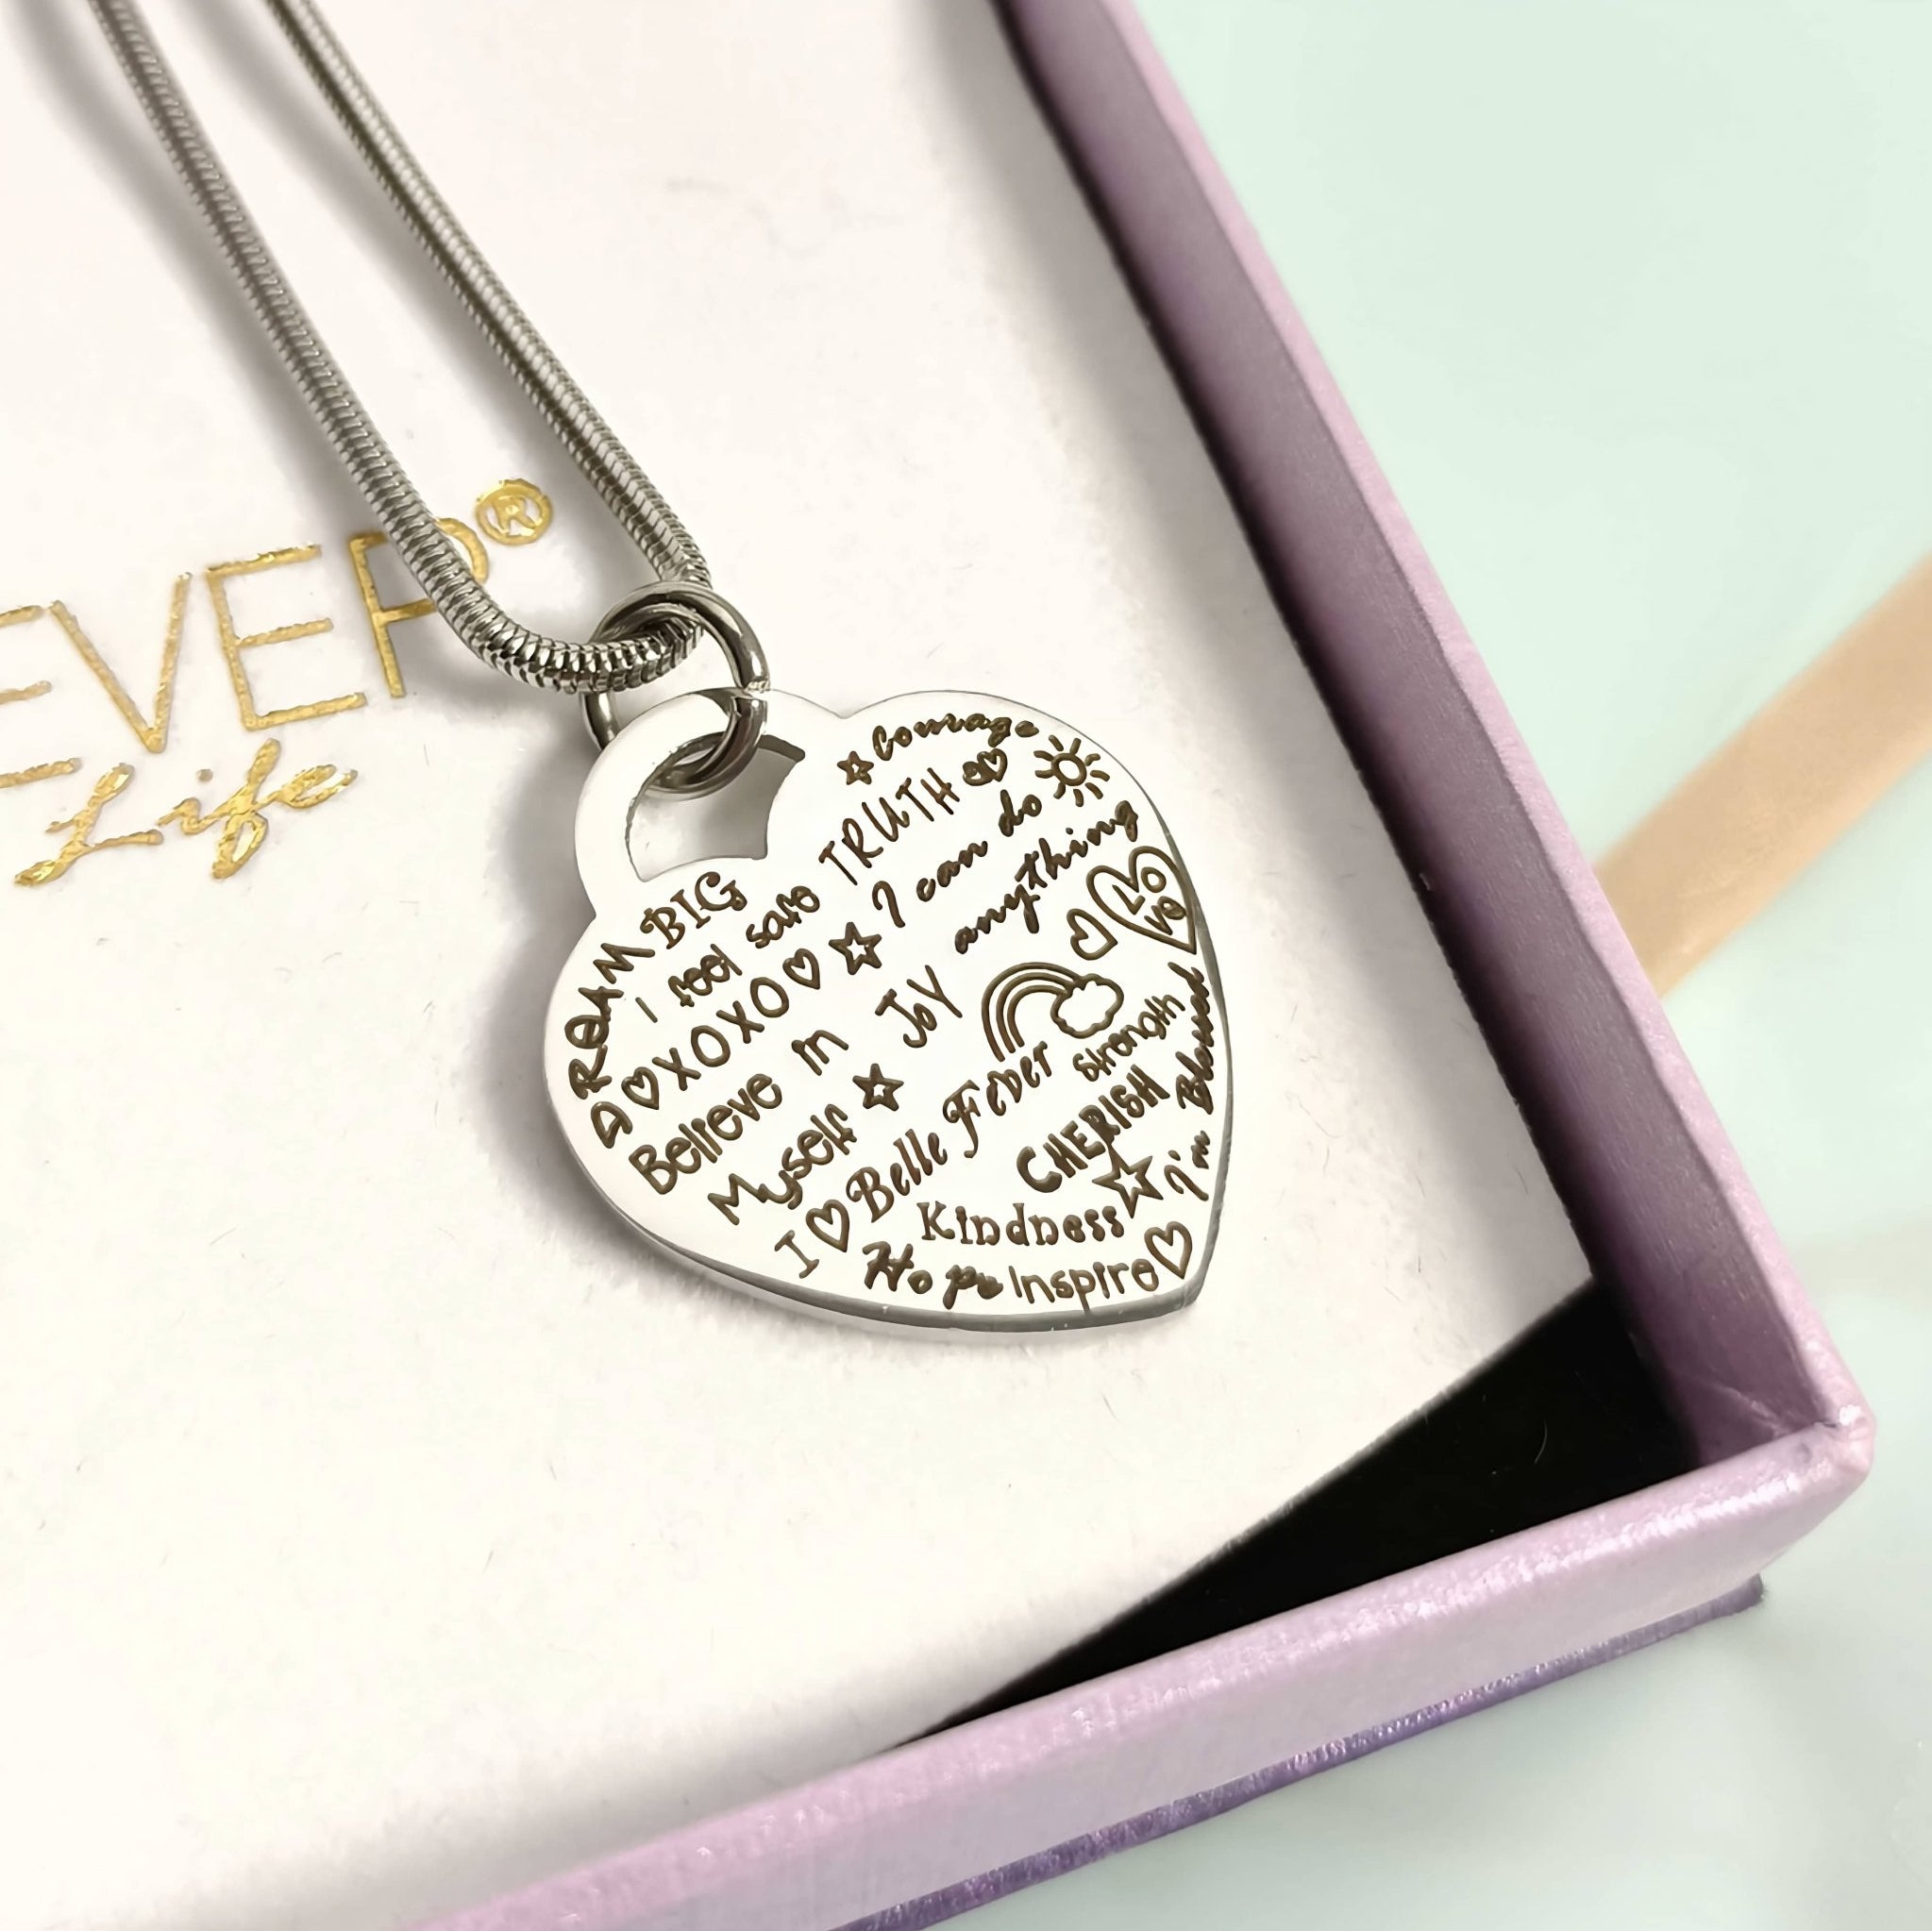 Heart of Hope Necklace - Mothers Jewellery by Belle Fever